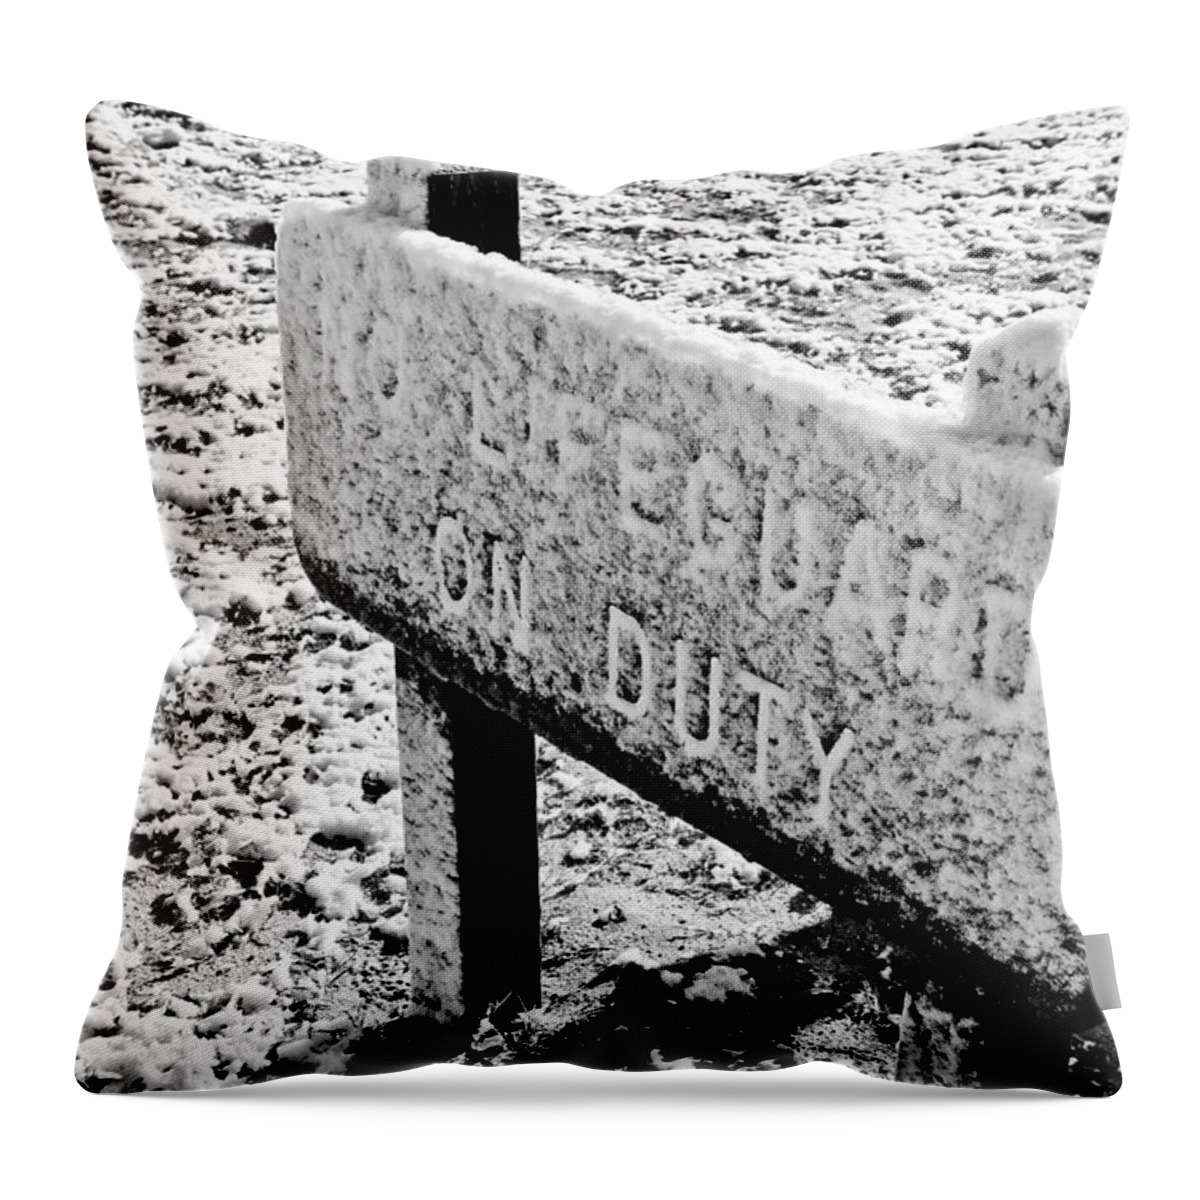 Myrtle Beach State Park Throw Pillow featuring the photograph No Lifeguard on Duty by Jessica Brown